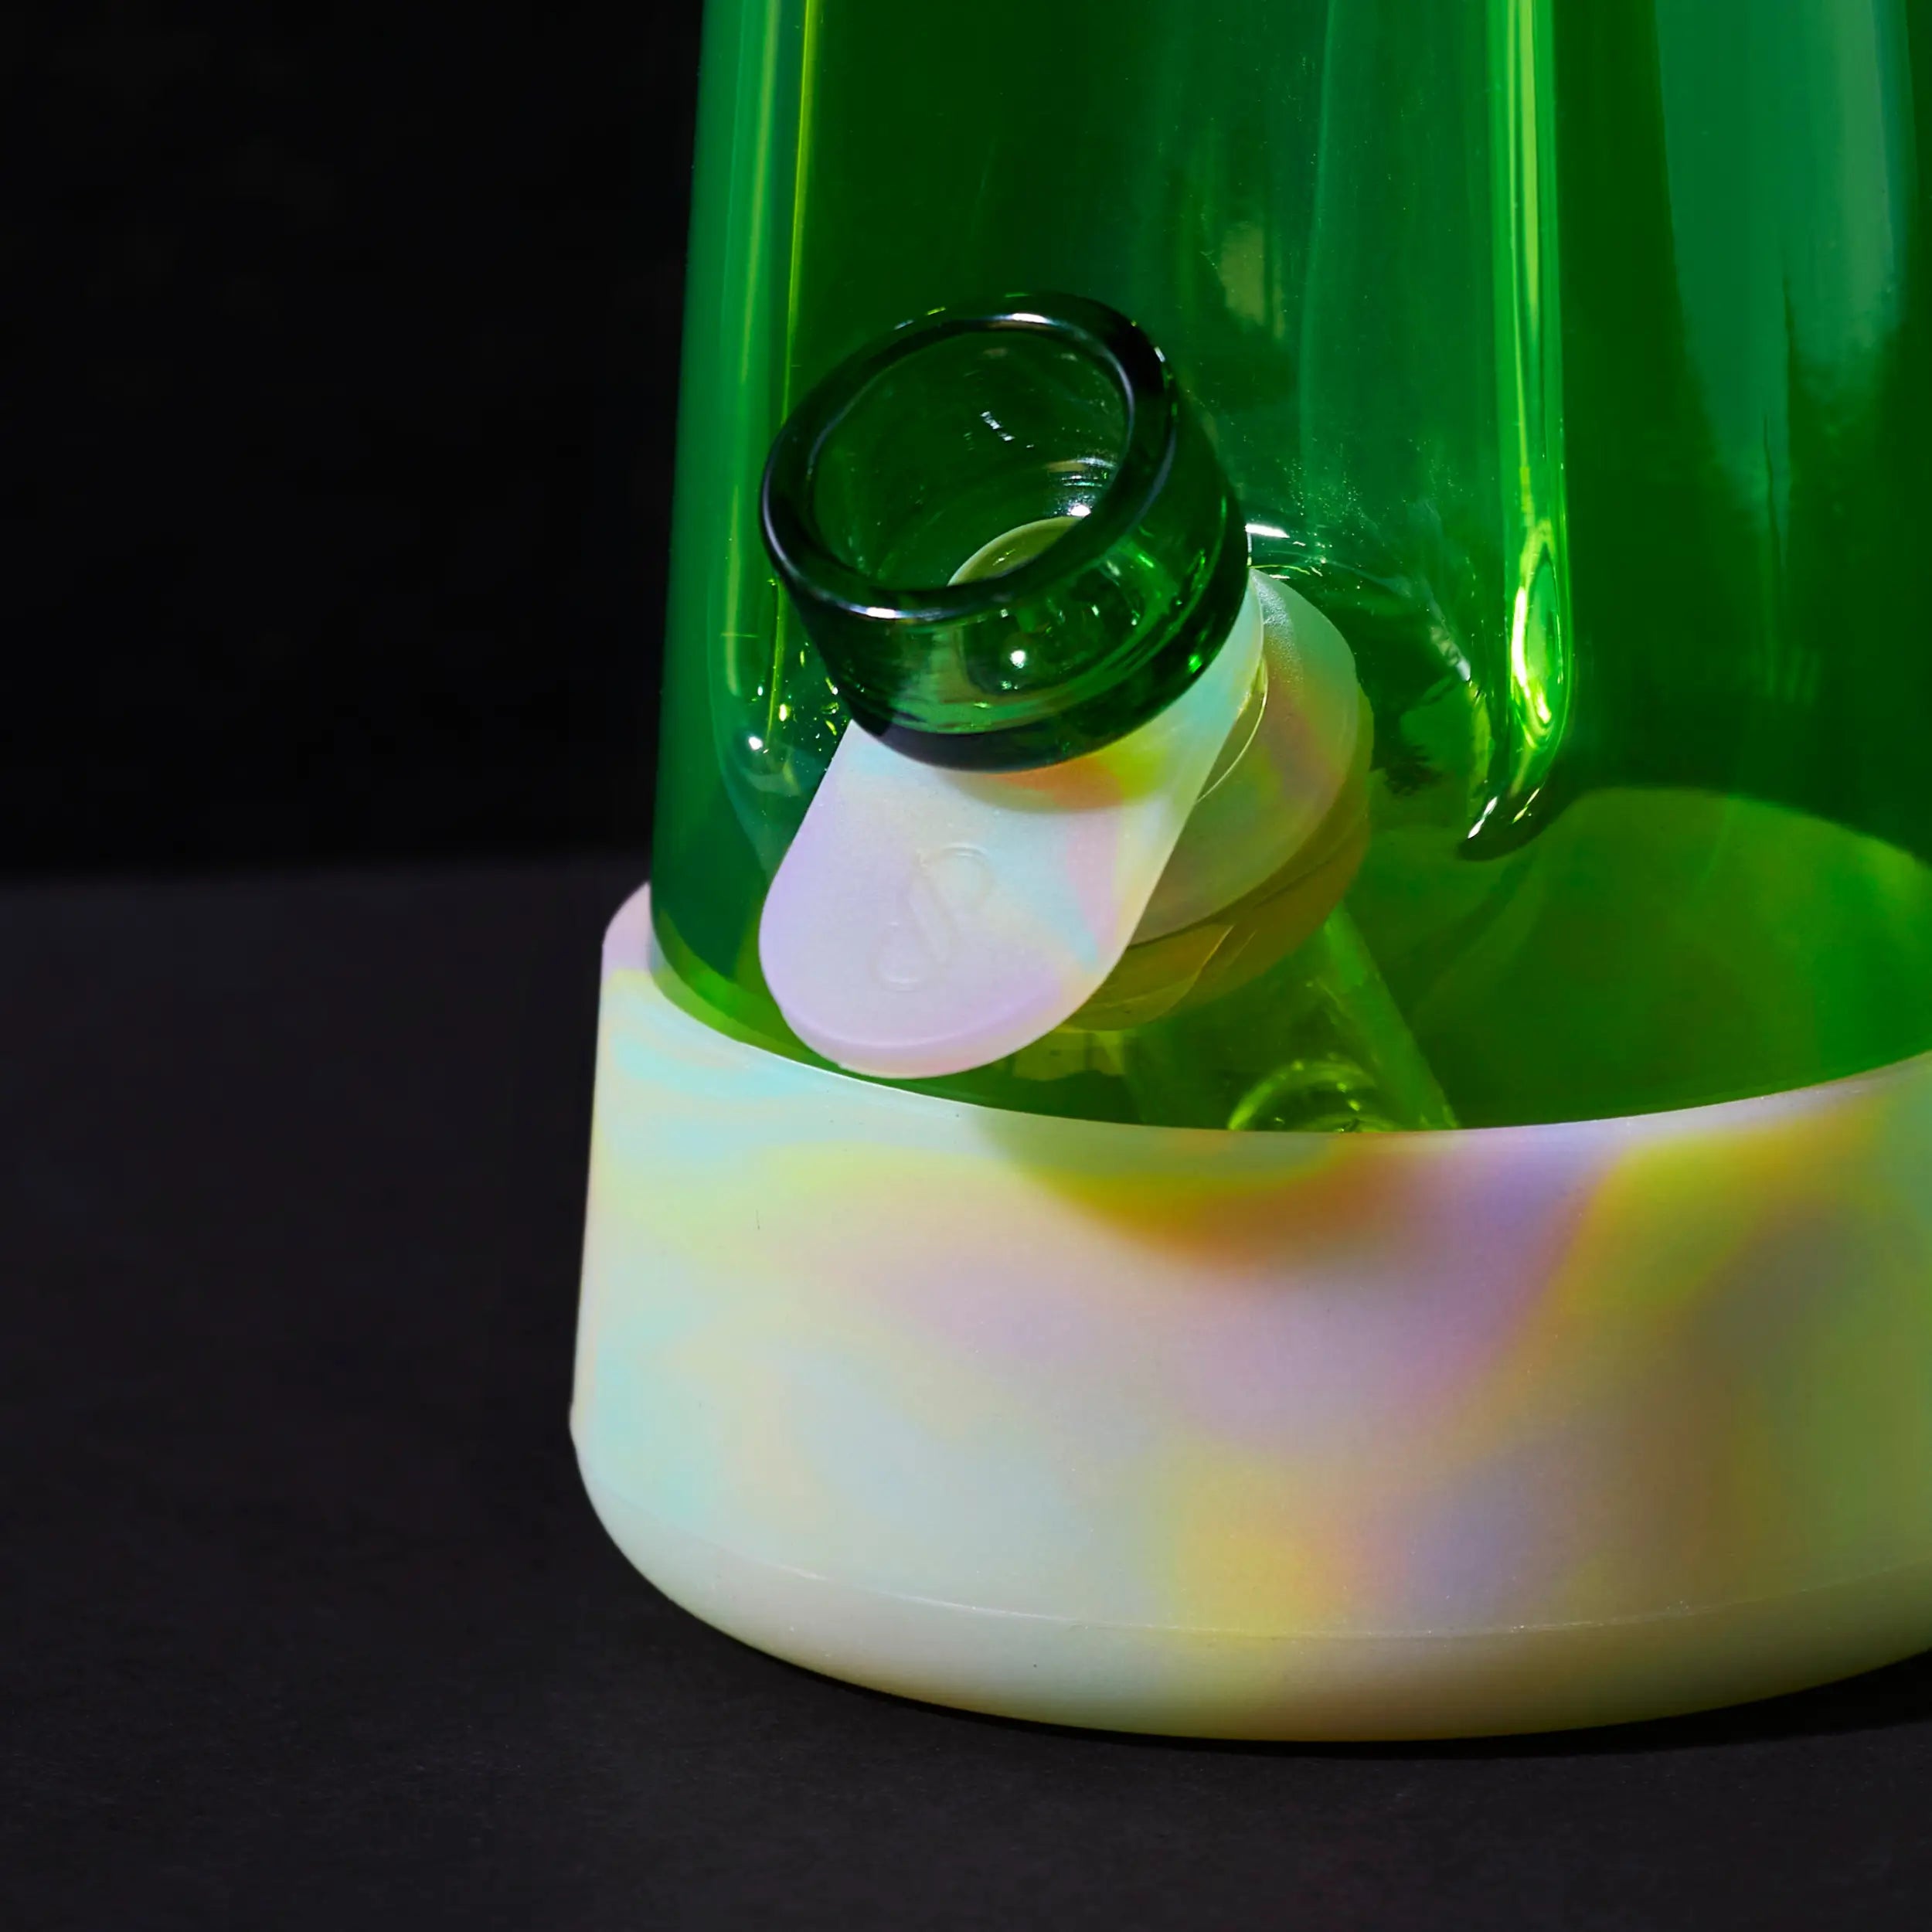 a glow-in-the-dark glass bong and pipe with silicone sleeve in collaboration with session goods x weedfeed with customer designed packaging